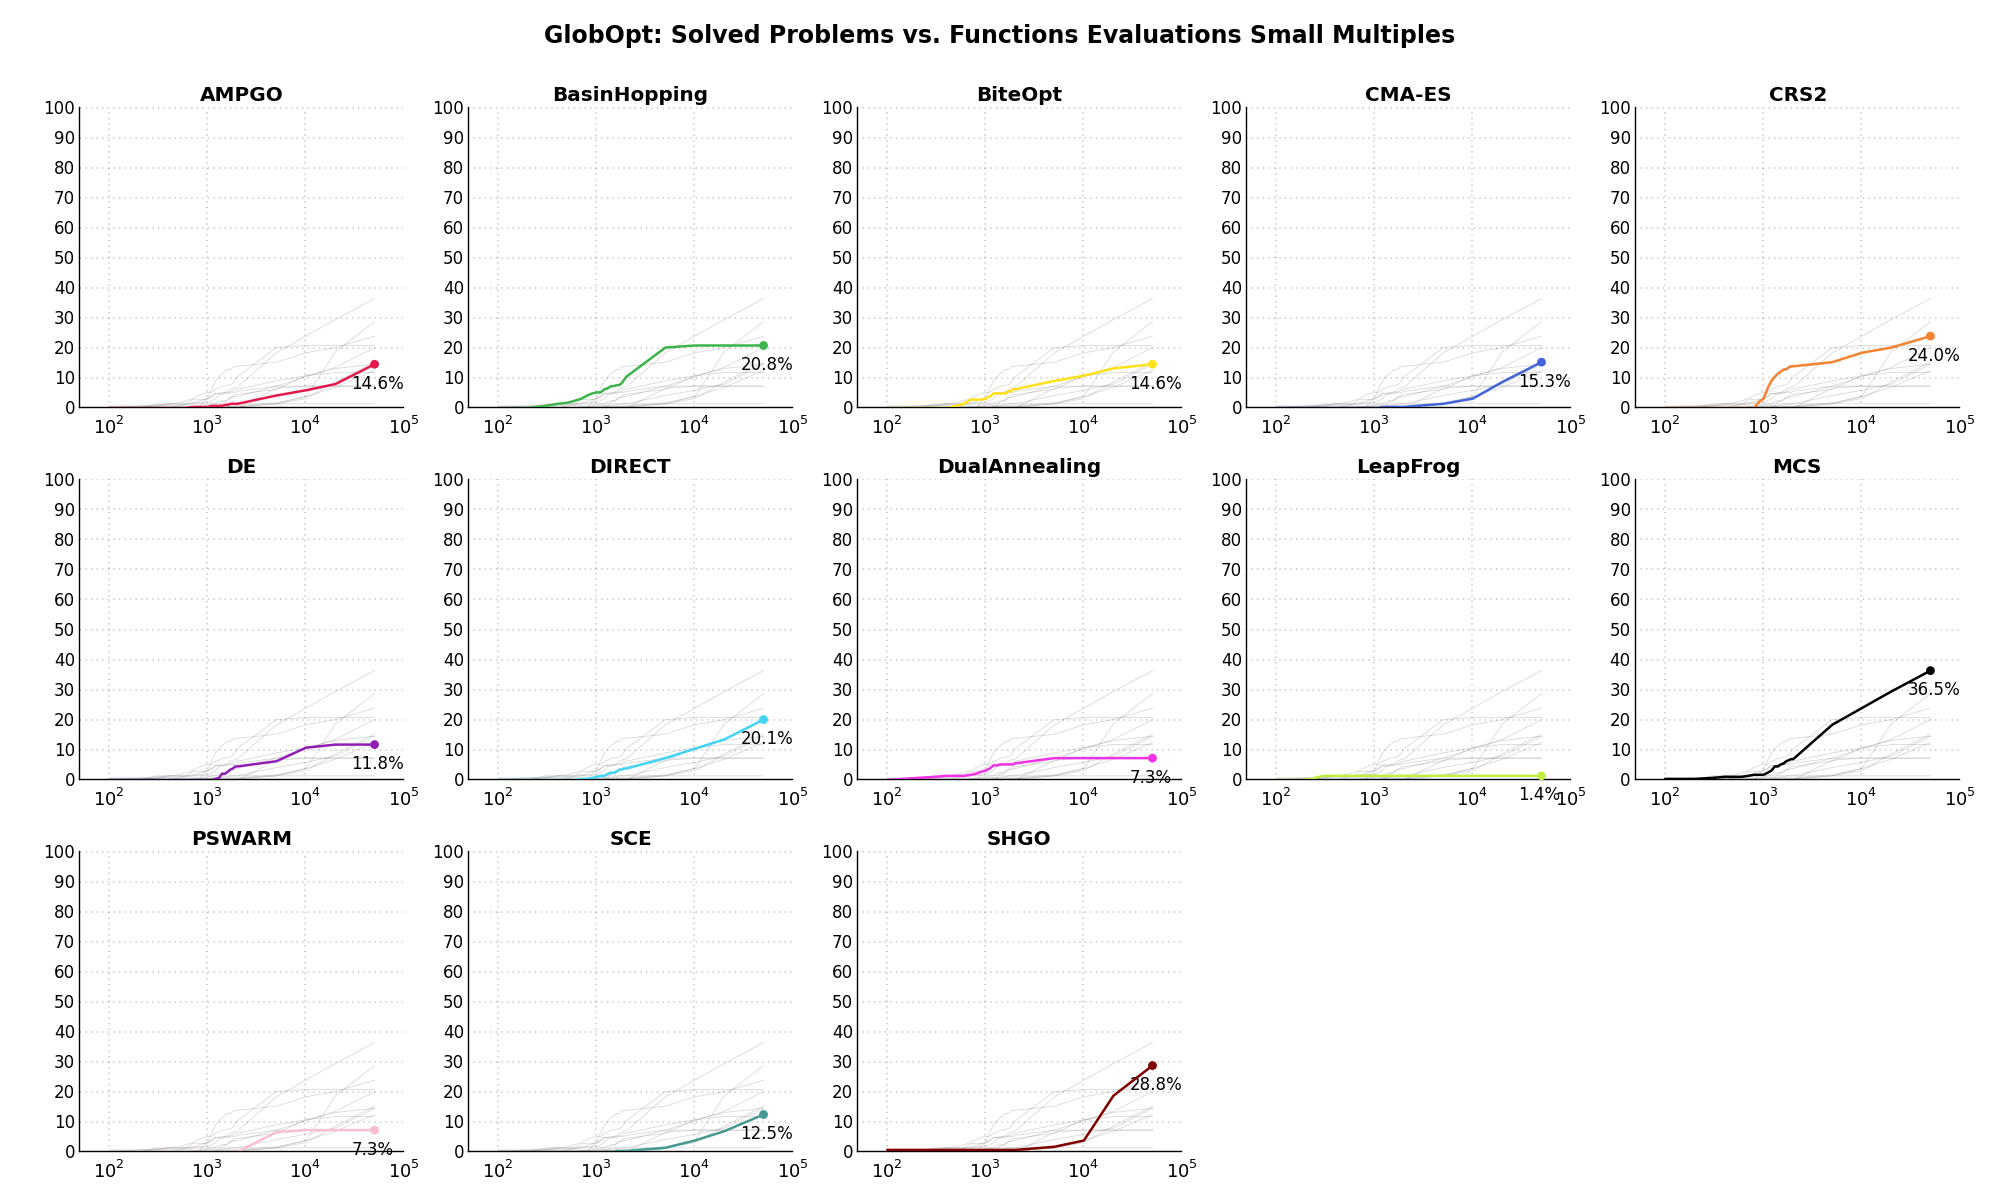 Percentage of problems solved given a fixed number of function evaluations on the GlobOpt test suite